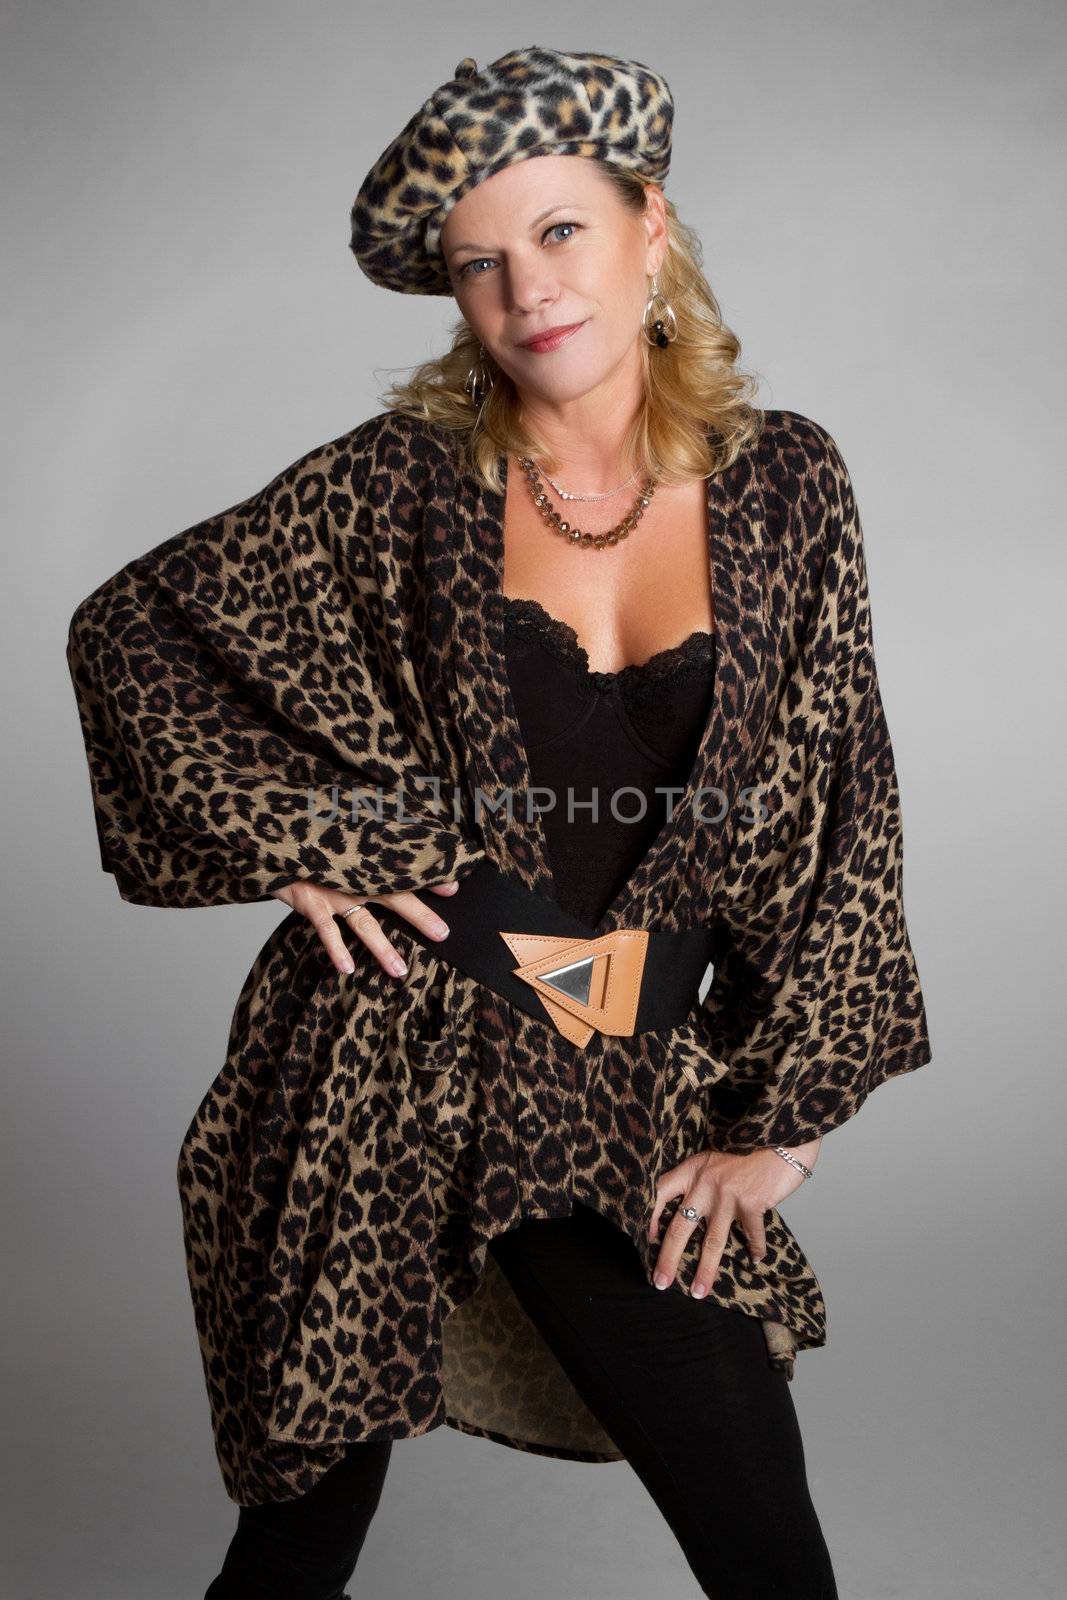 Middle aged cougar fashion woman